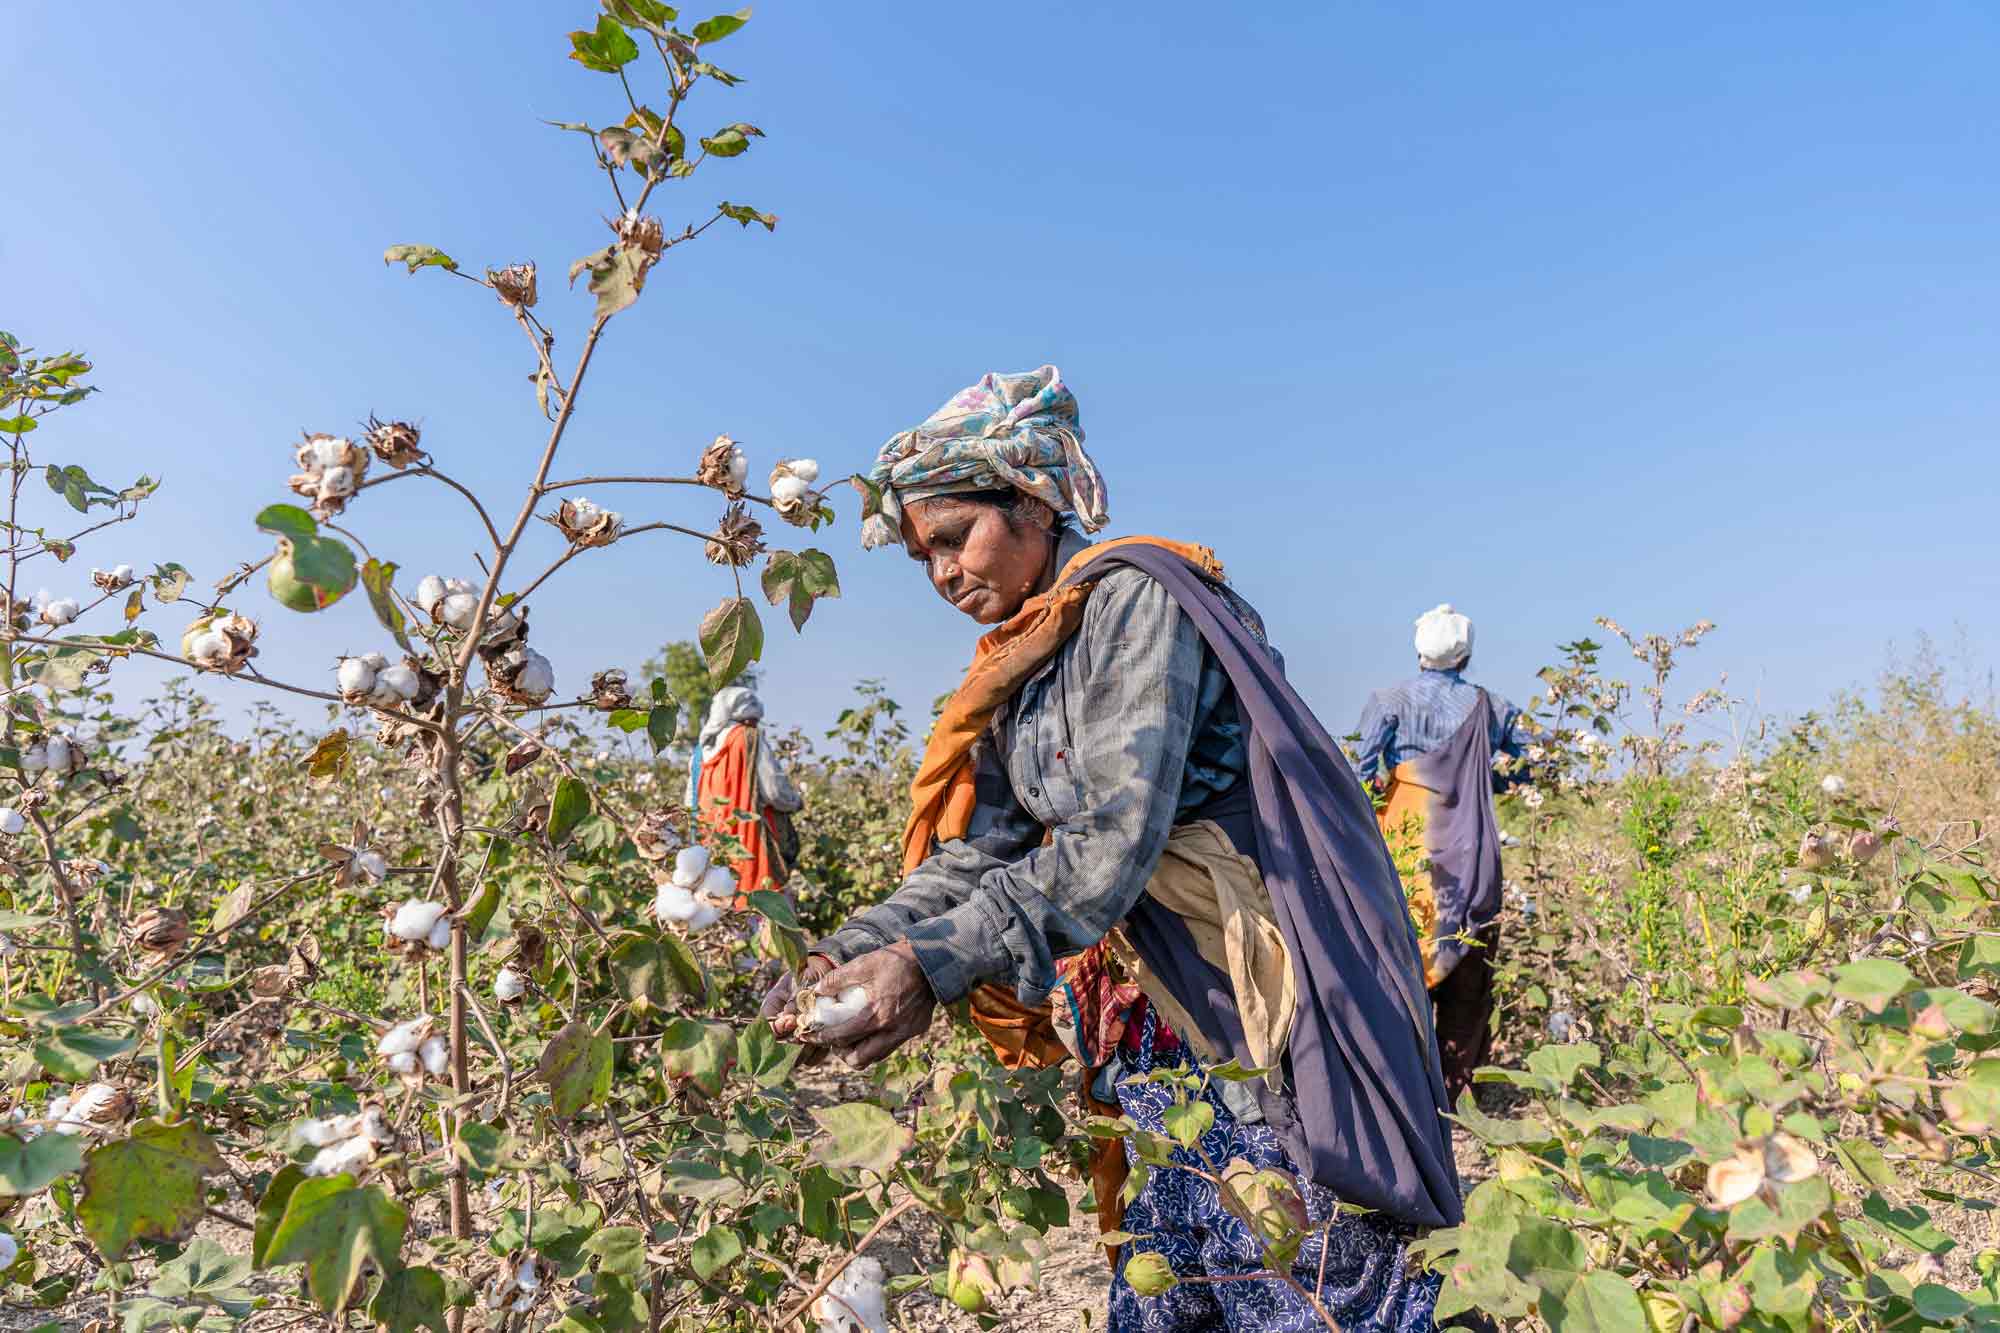 Woman On A Cotton Field In India